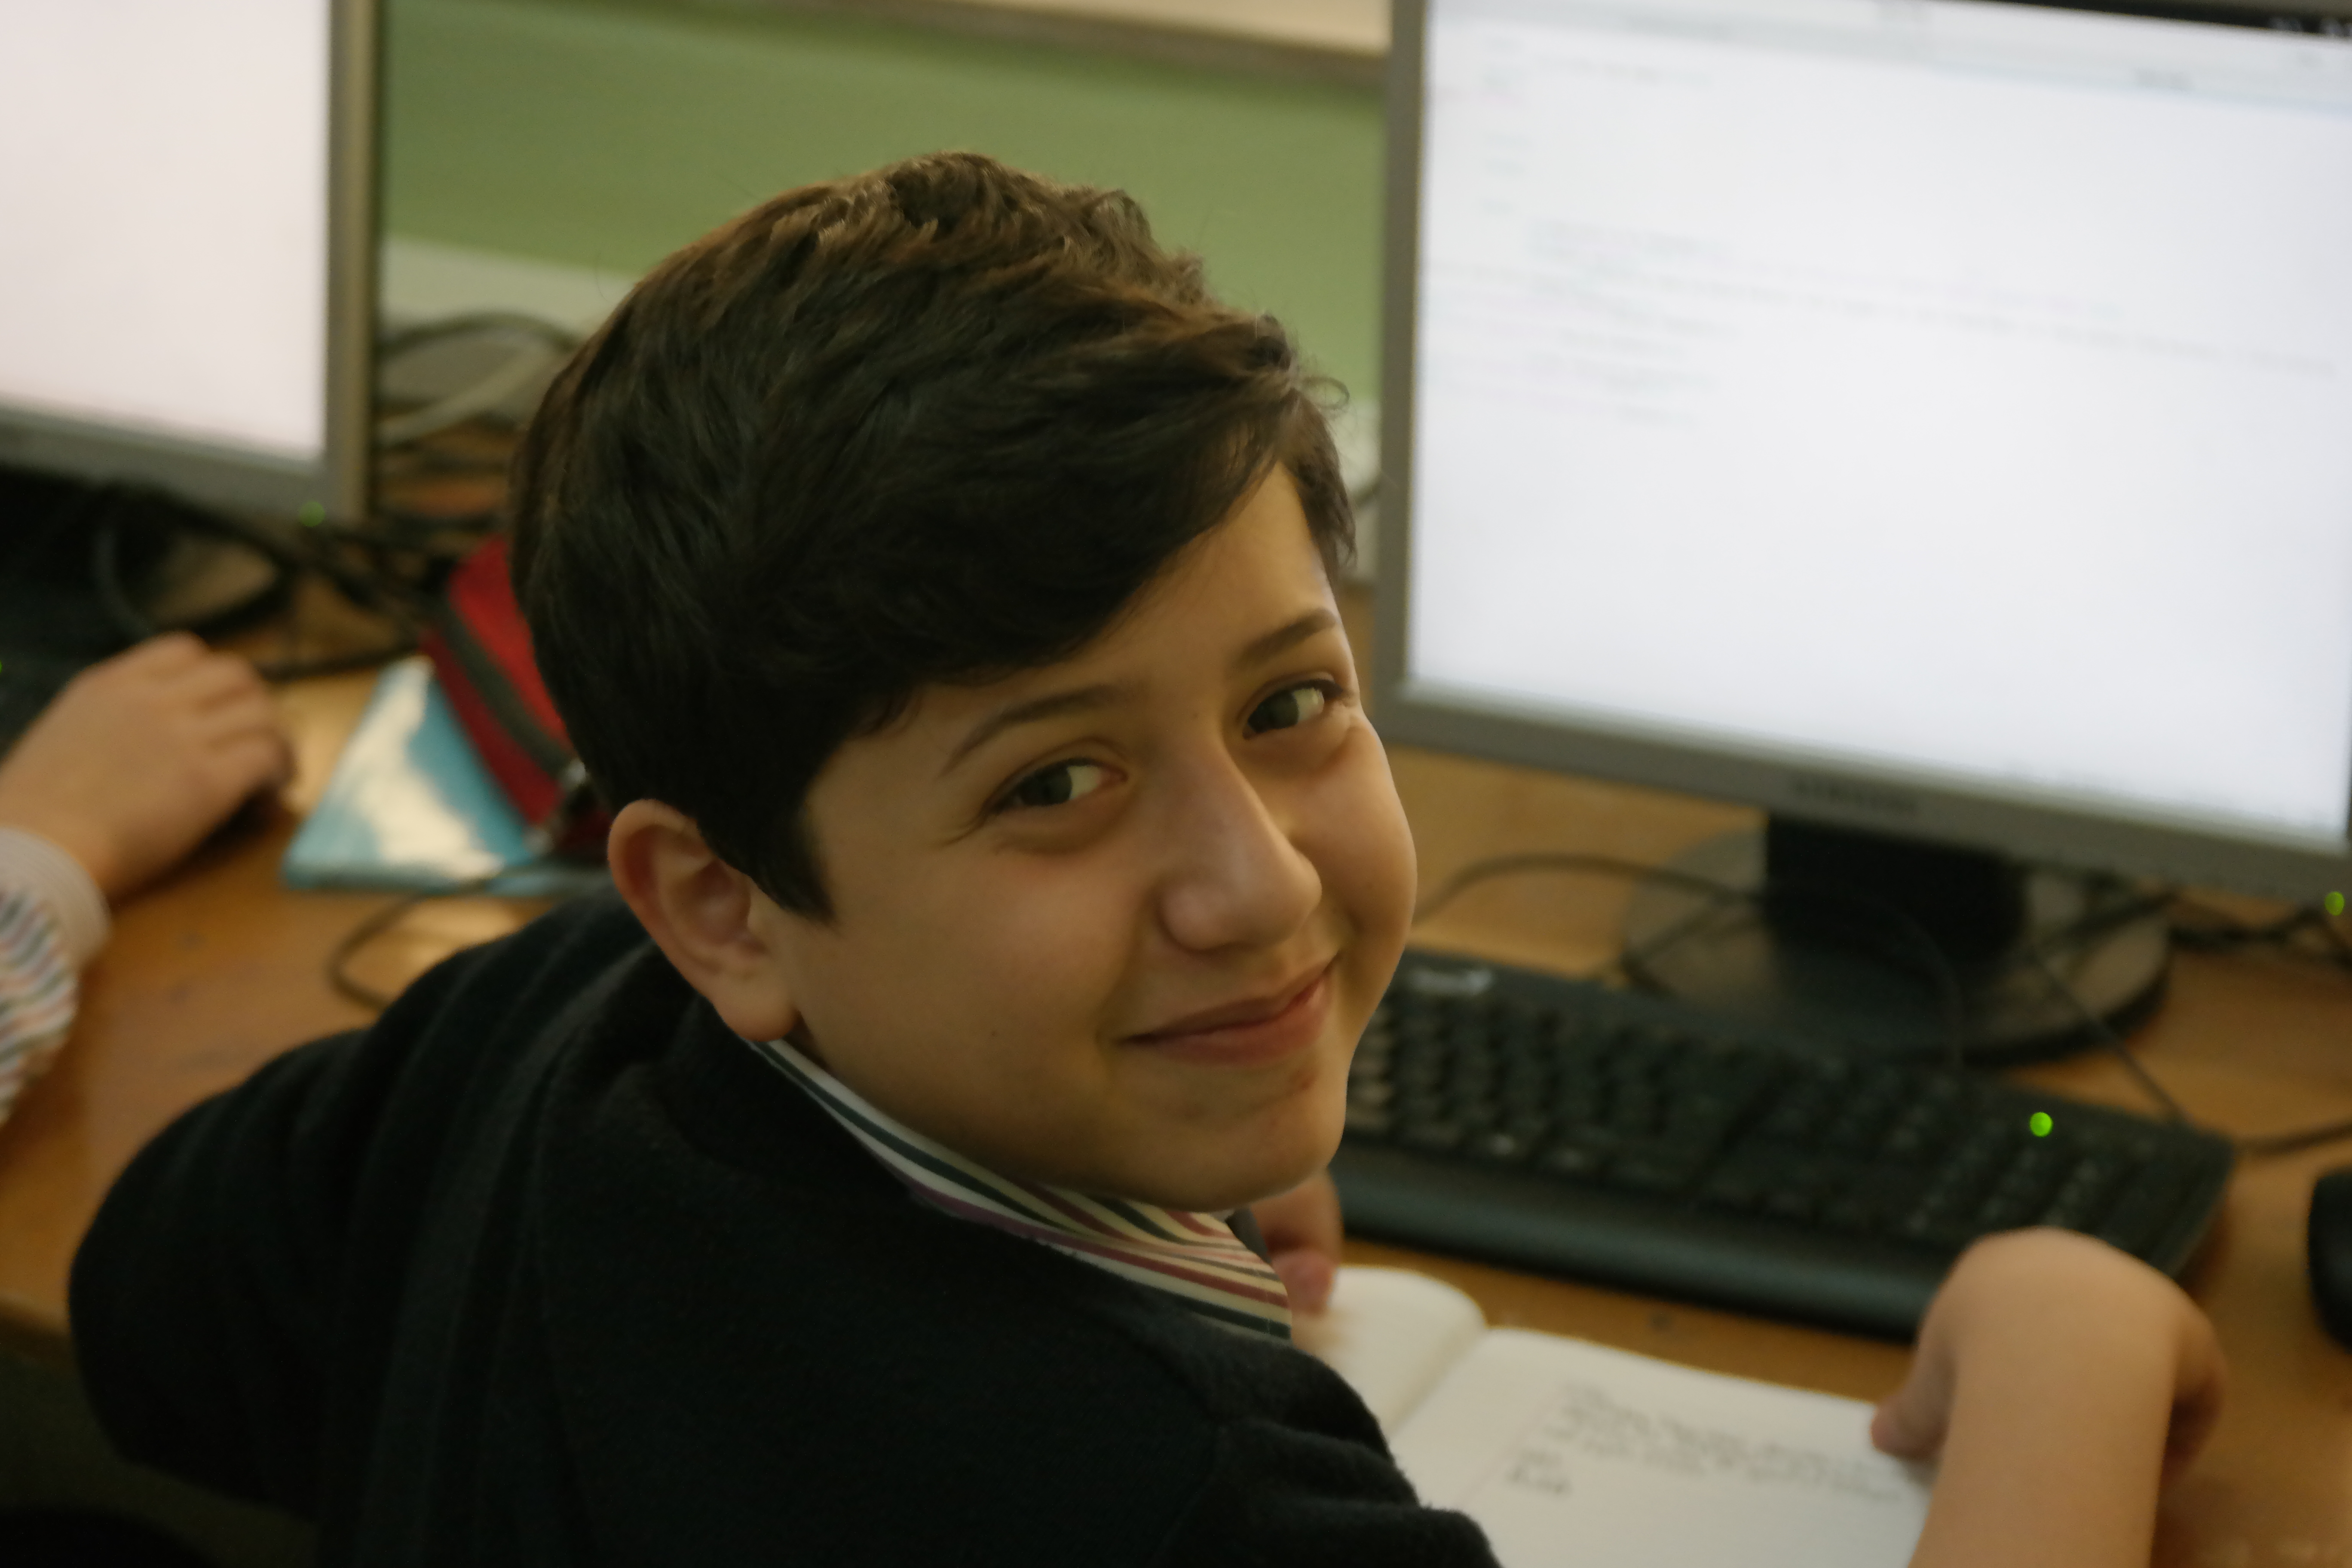 Student from Lebanon Evangelical School works on lab assignment with Fedora Workstation